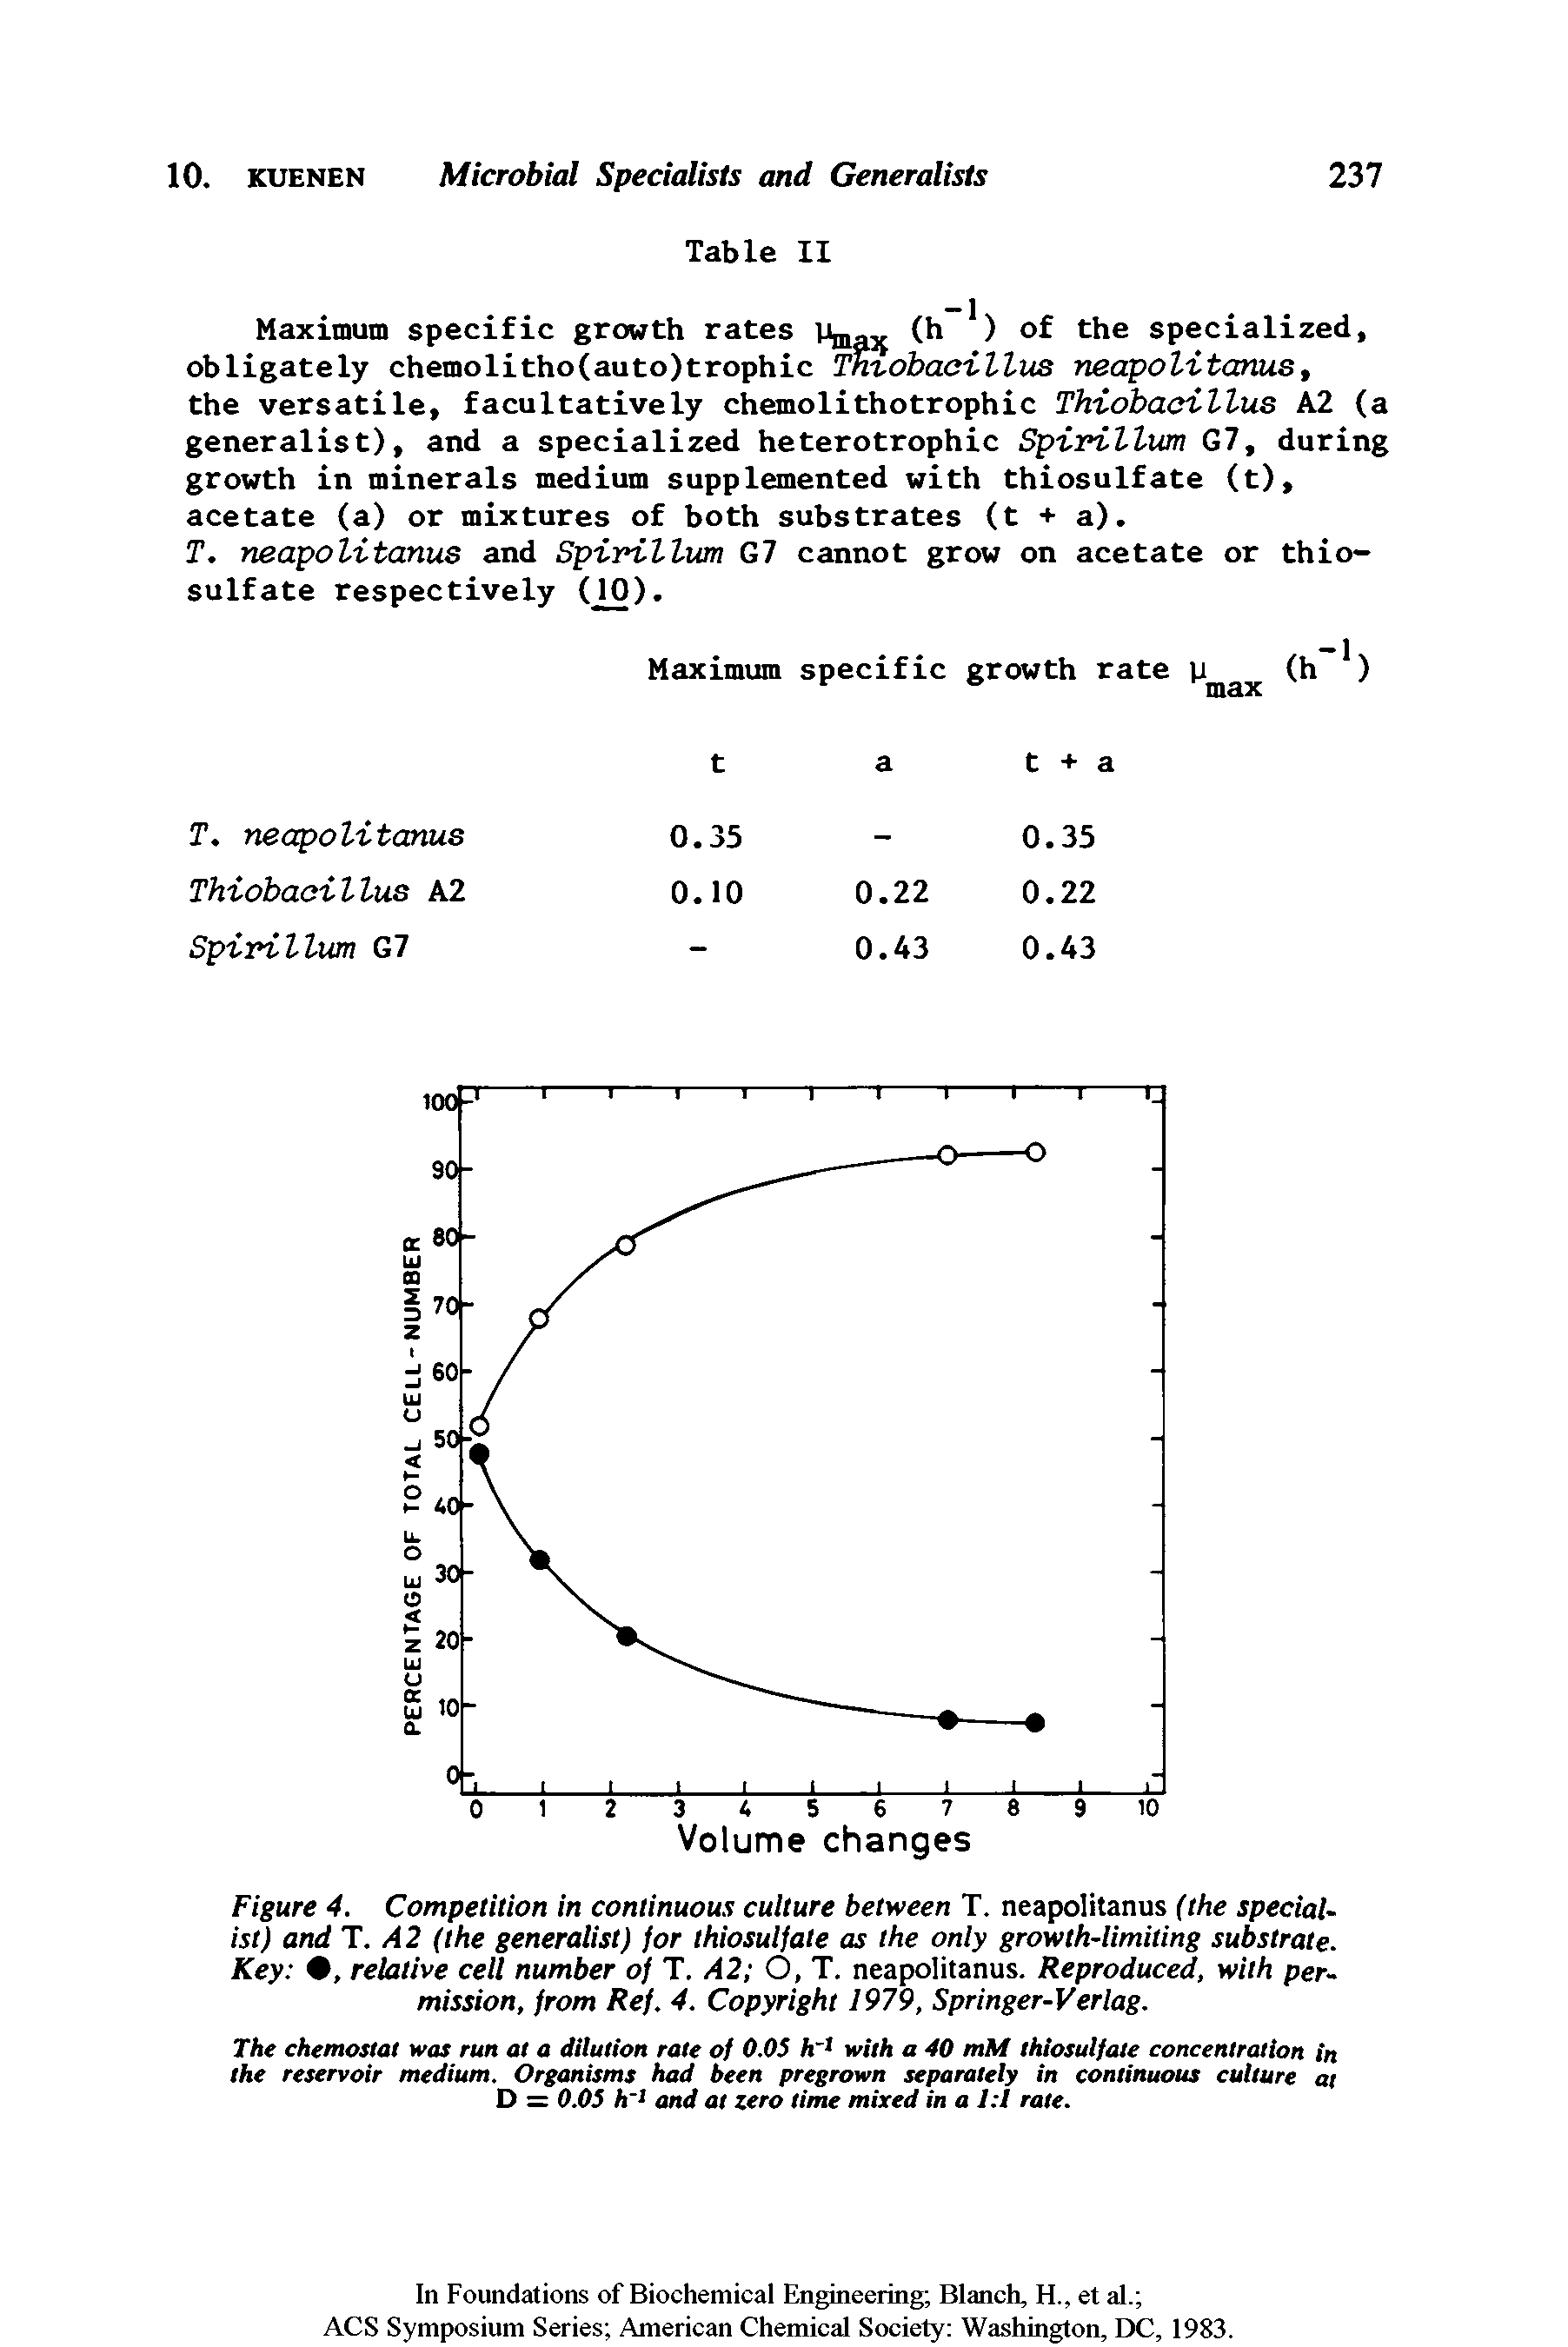 Figure 4. Competition in continuous culture between T. neapolitanus (the specialist) and T. A2 (the generalist) for thiosulfate as the only growth-limiting substrate. Key , relative cell number of T. A2 O, T. neapolitanus. Reproduced, with permission, from Ref. 4. Copyright 1979, Springer-Verlag.